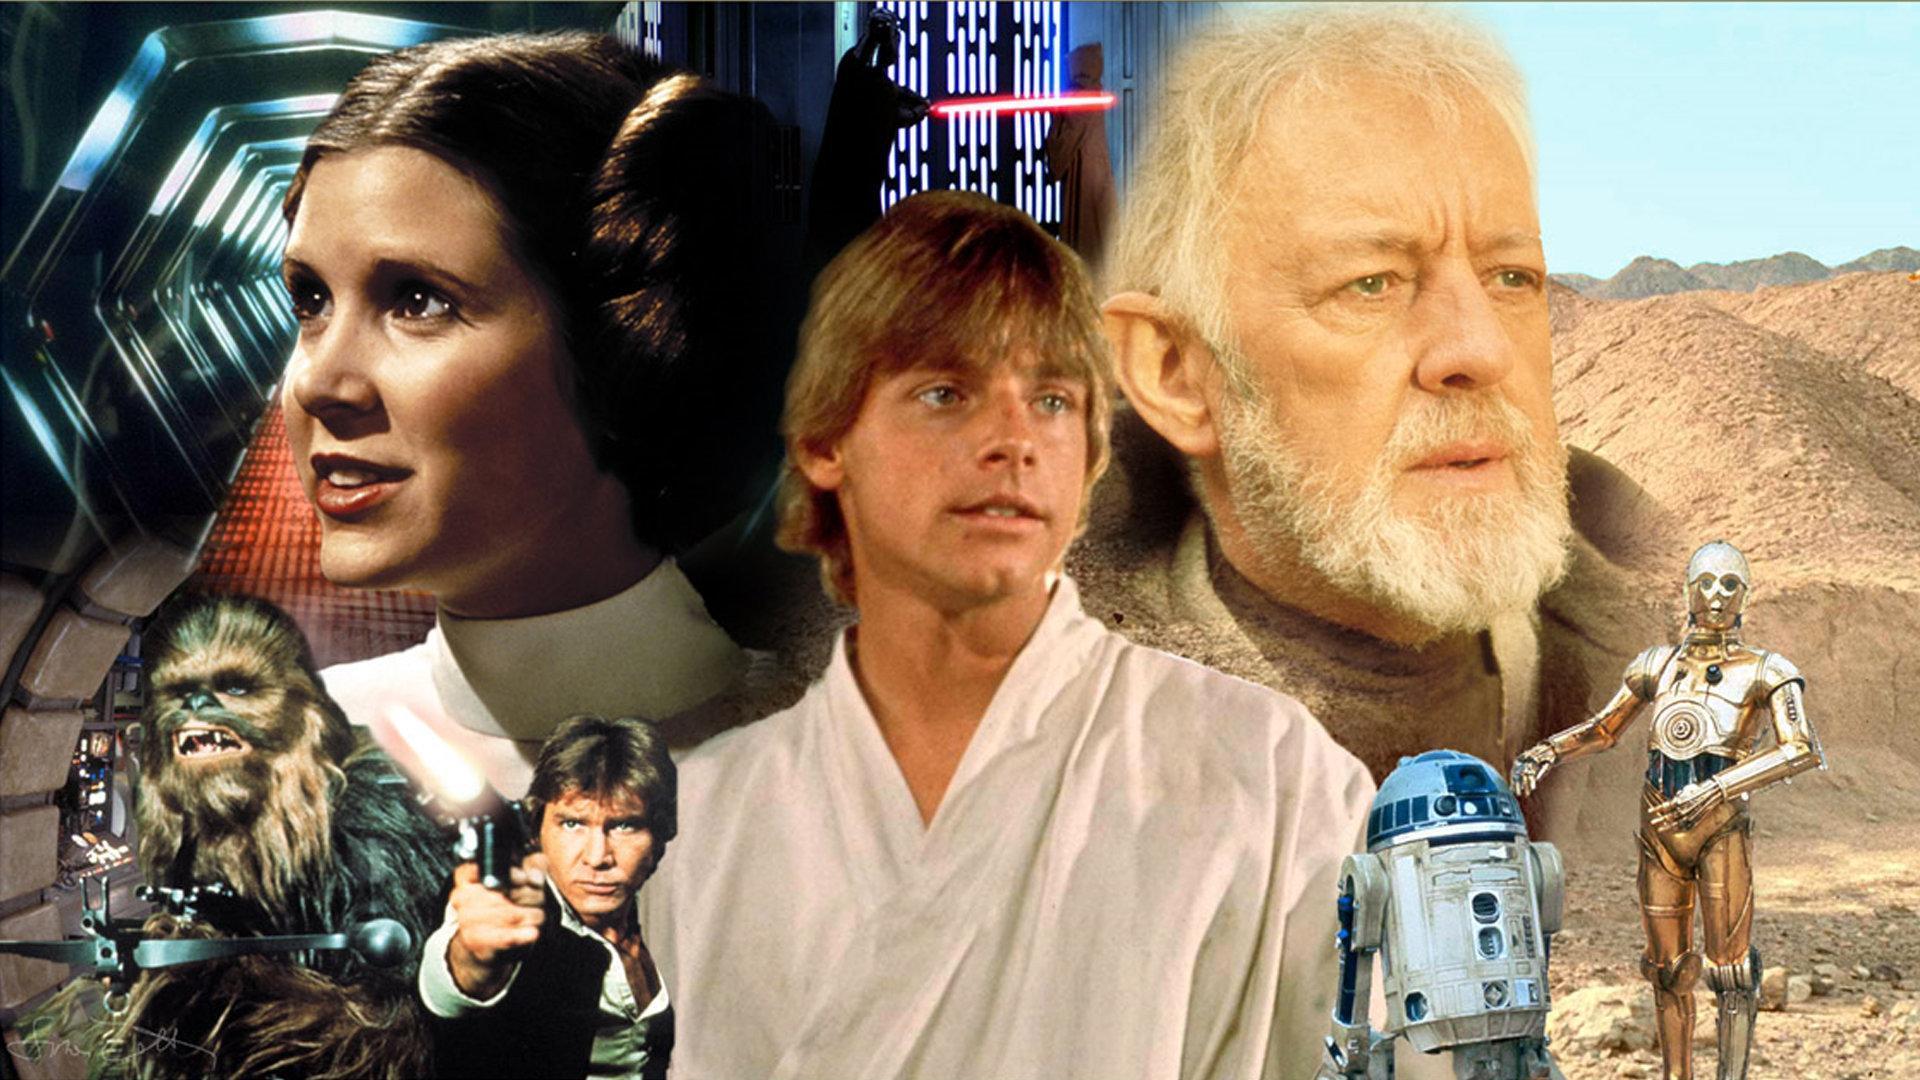 Movie Star Wars Episode IV: A New Hope Wallpaper 1920x1080 px Free